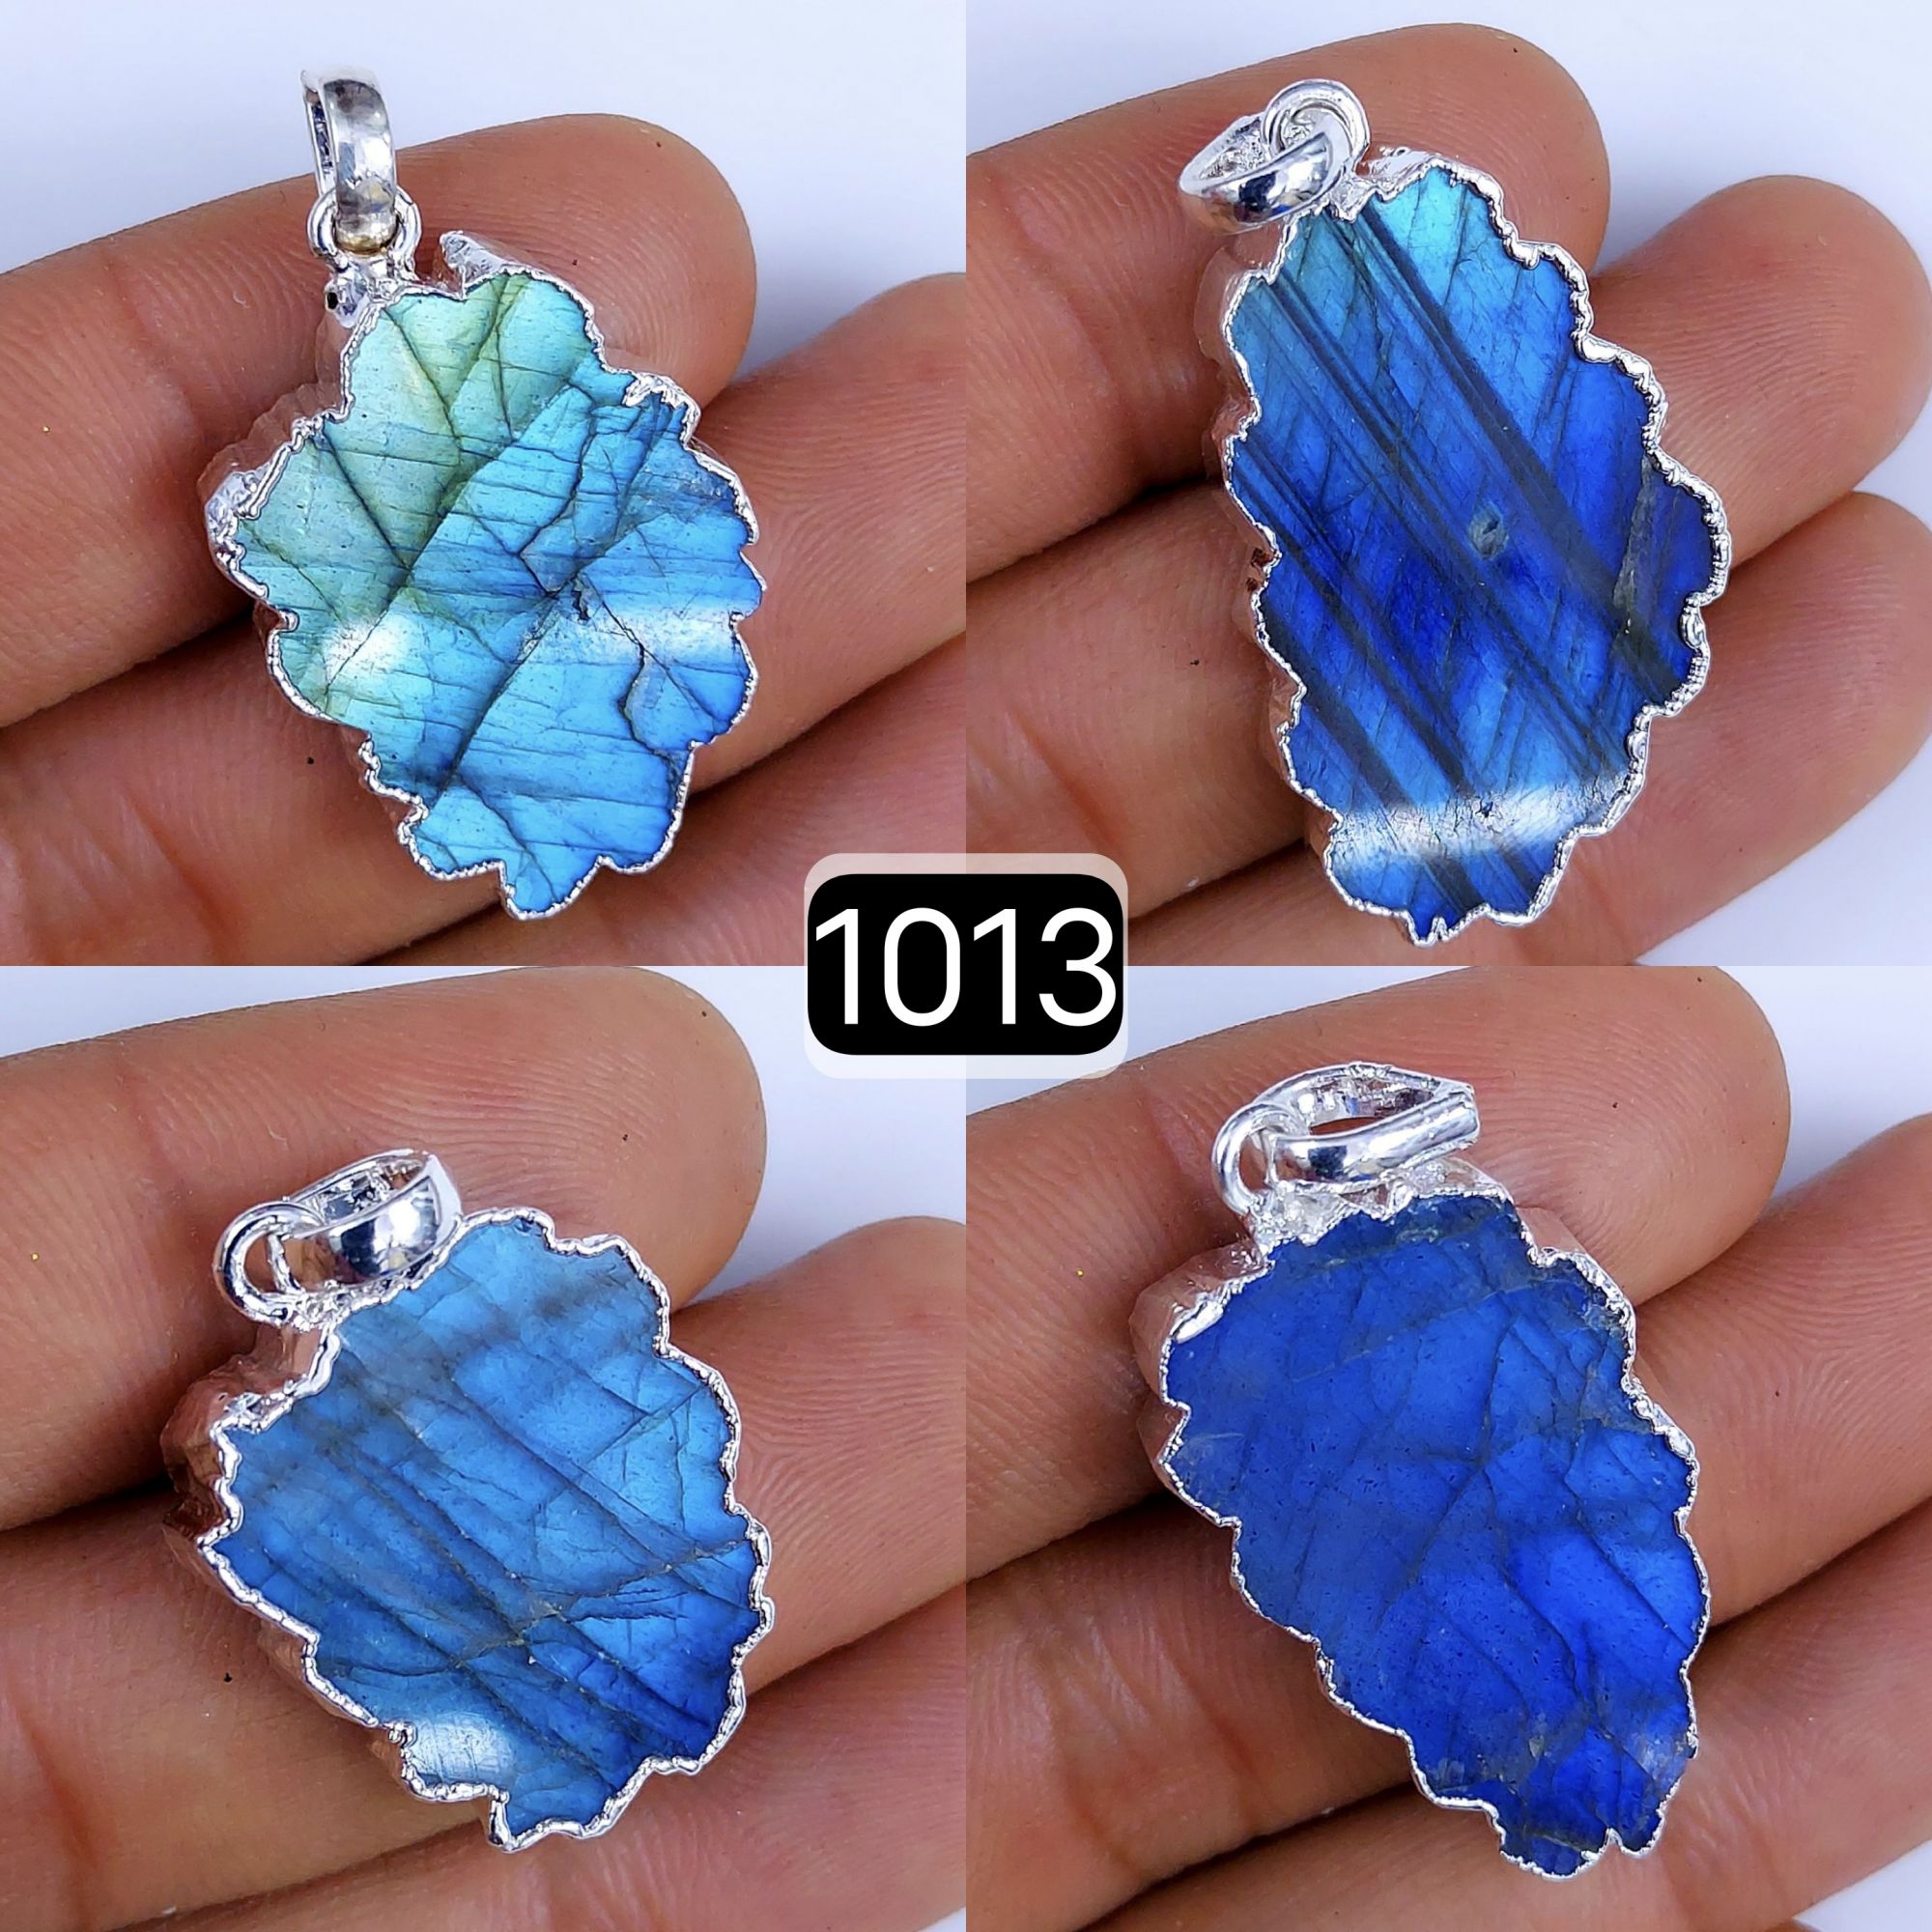 153Cts Natural Blue Labradorite Silver Electroplated Slice Pendant 32x18 22x12mm#1013